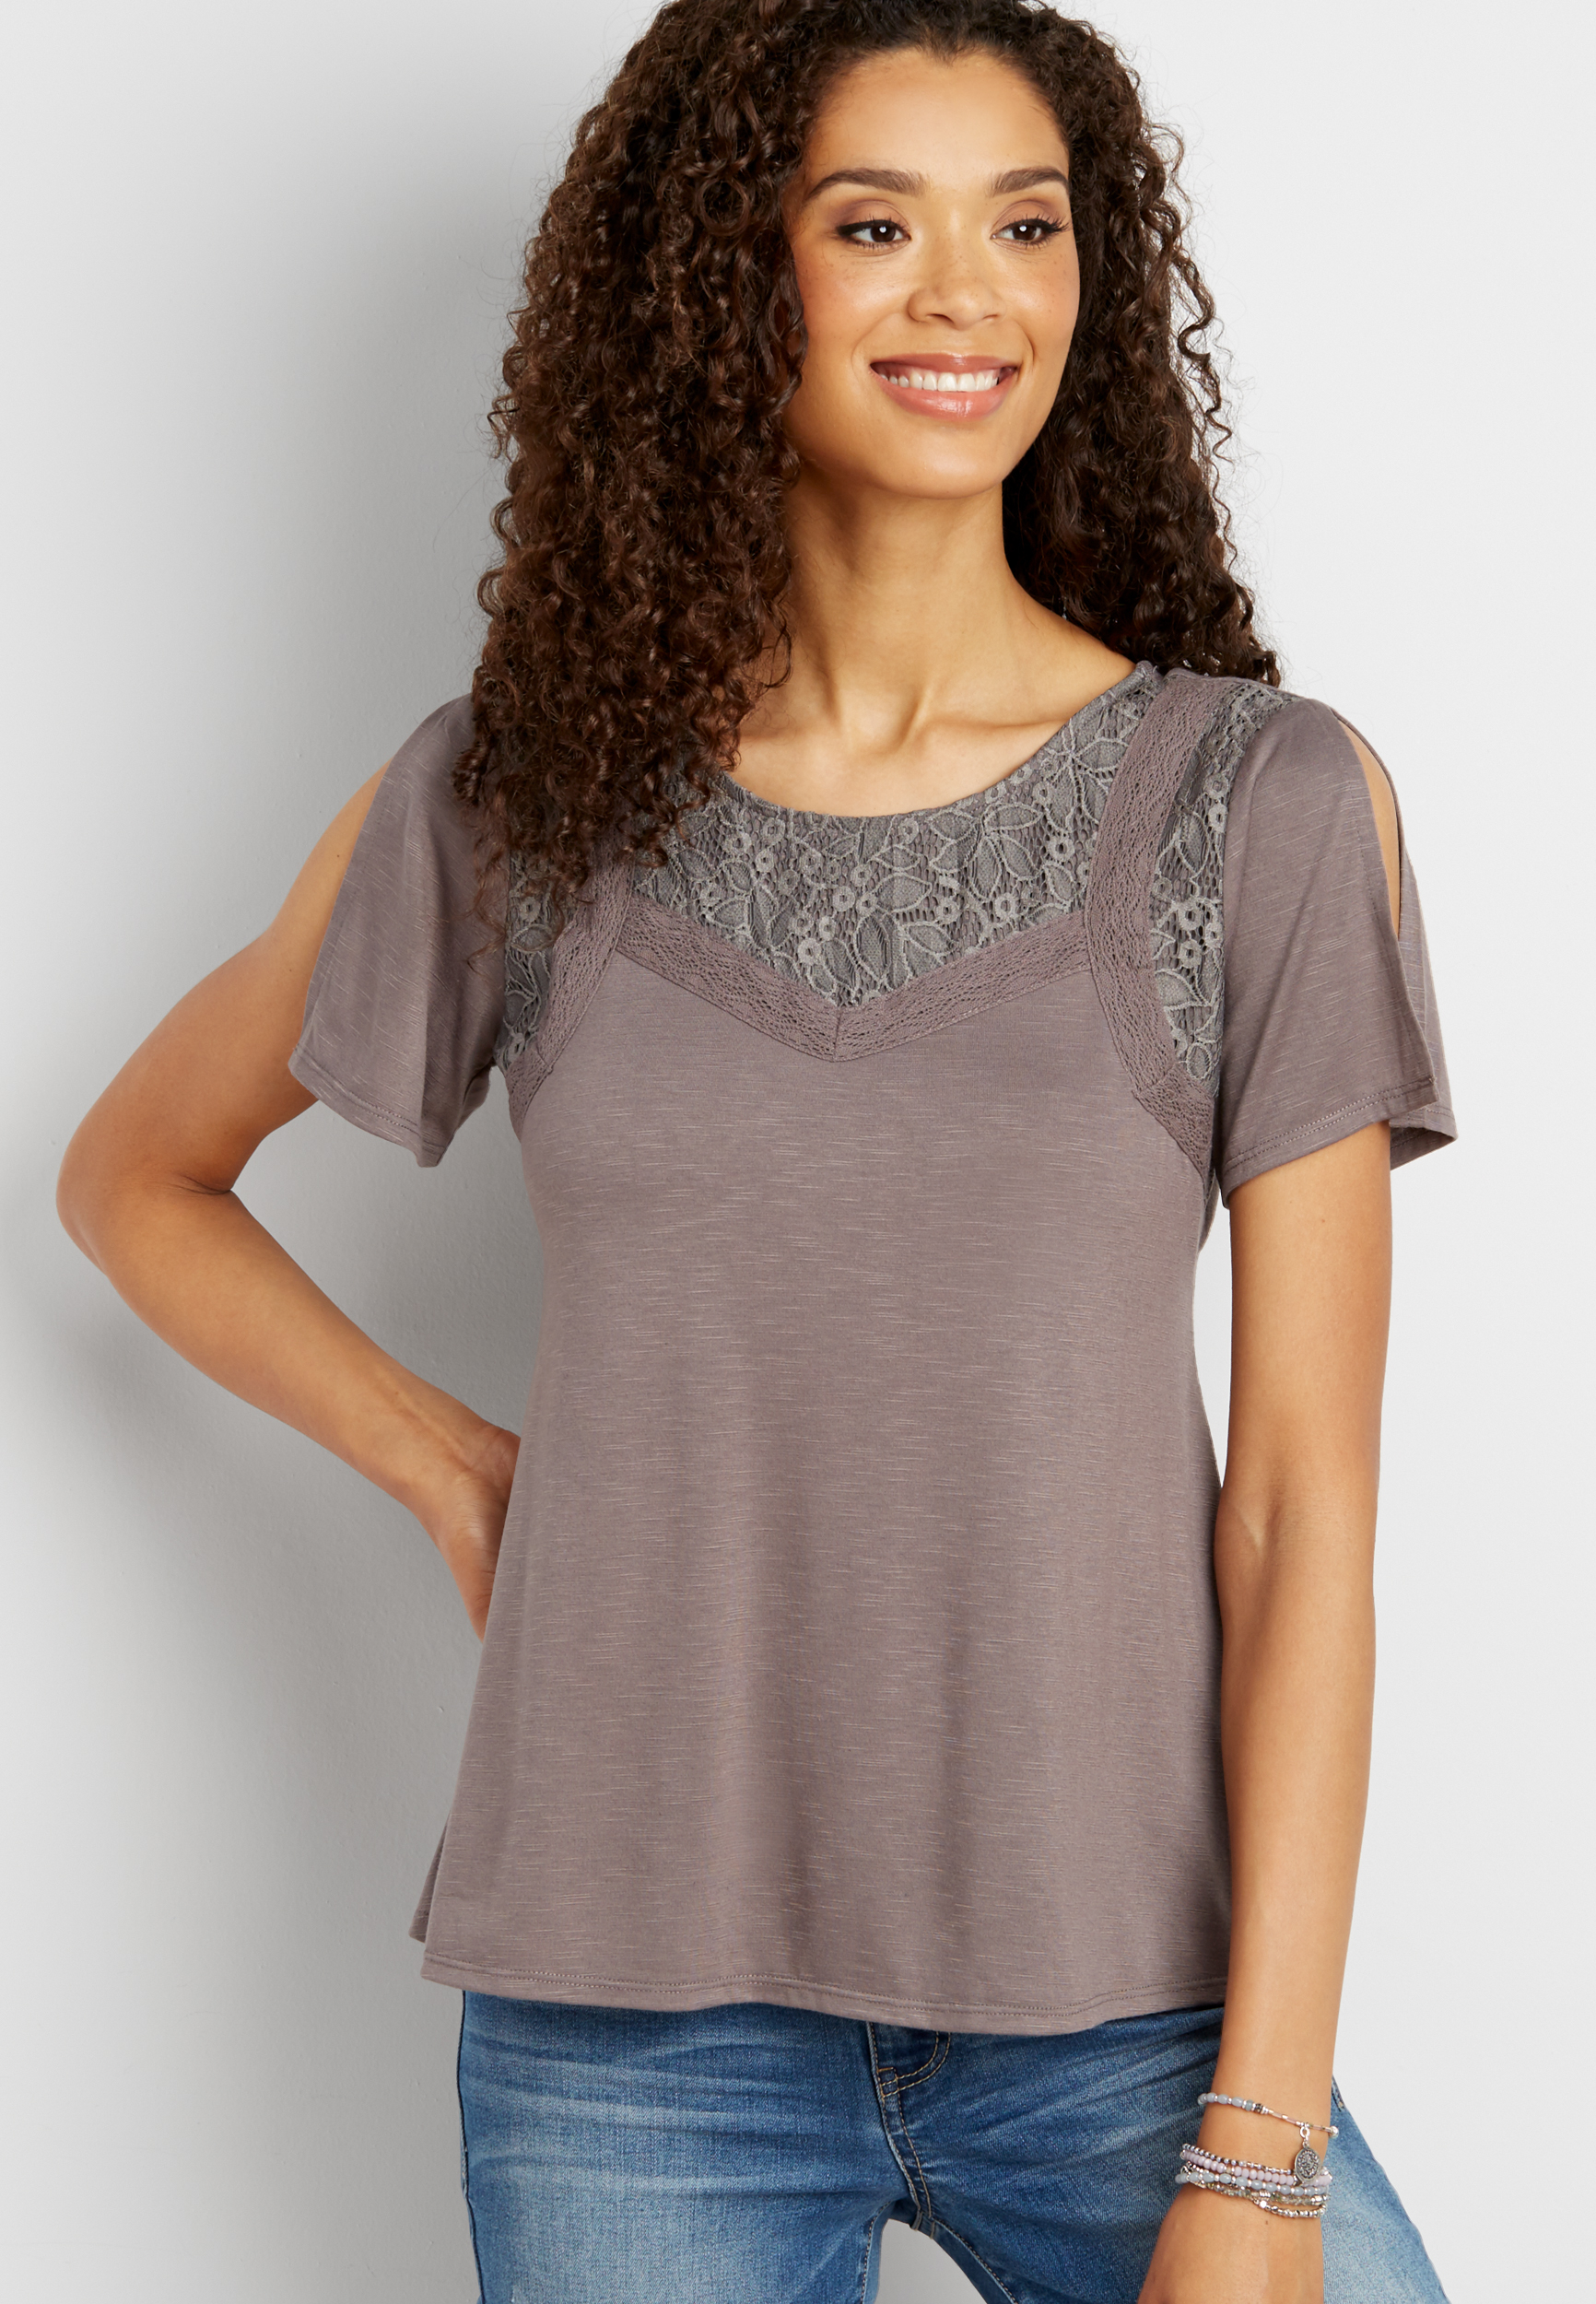 tee with lace and slit short sleeves | maurices